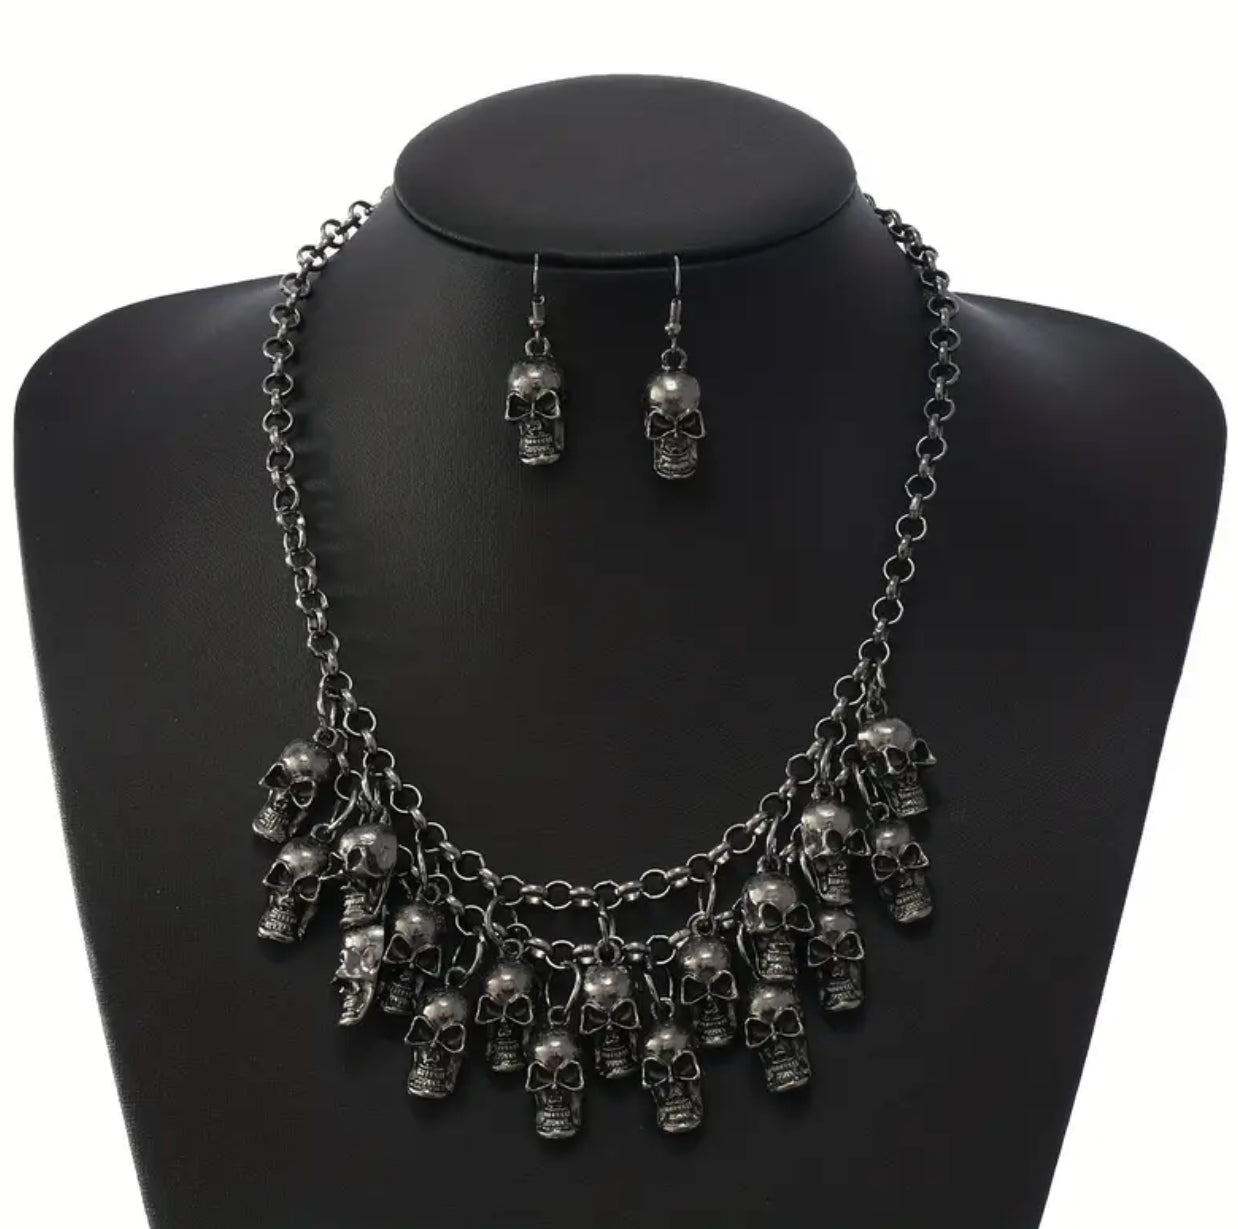 Skull Dangle Necklace and Earring Set